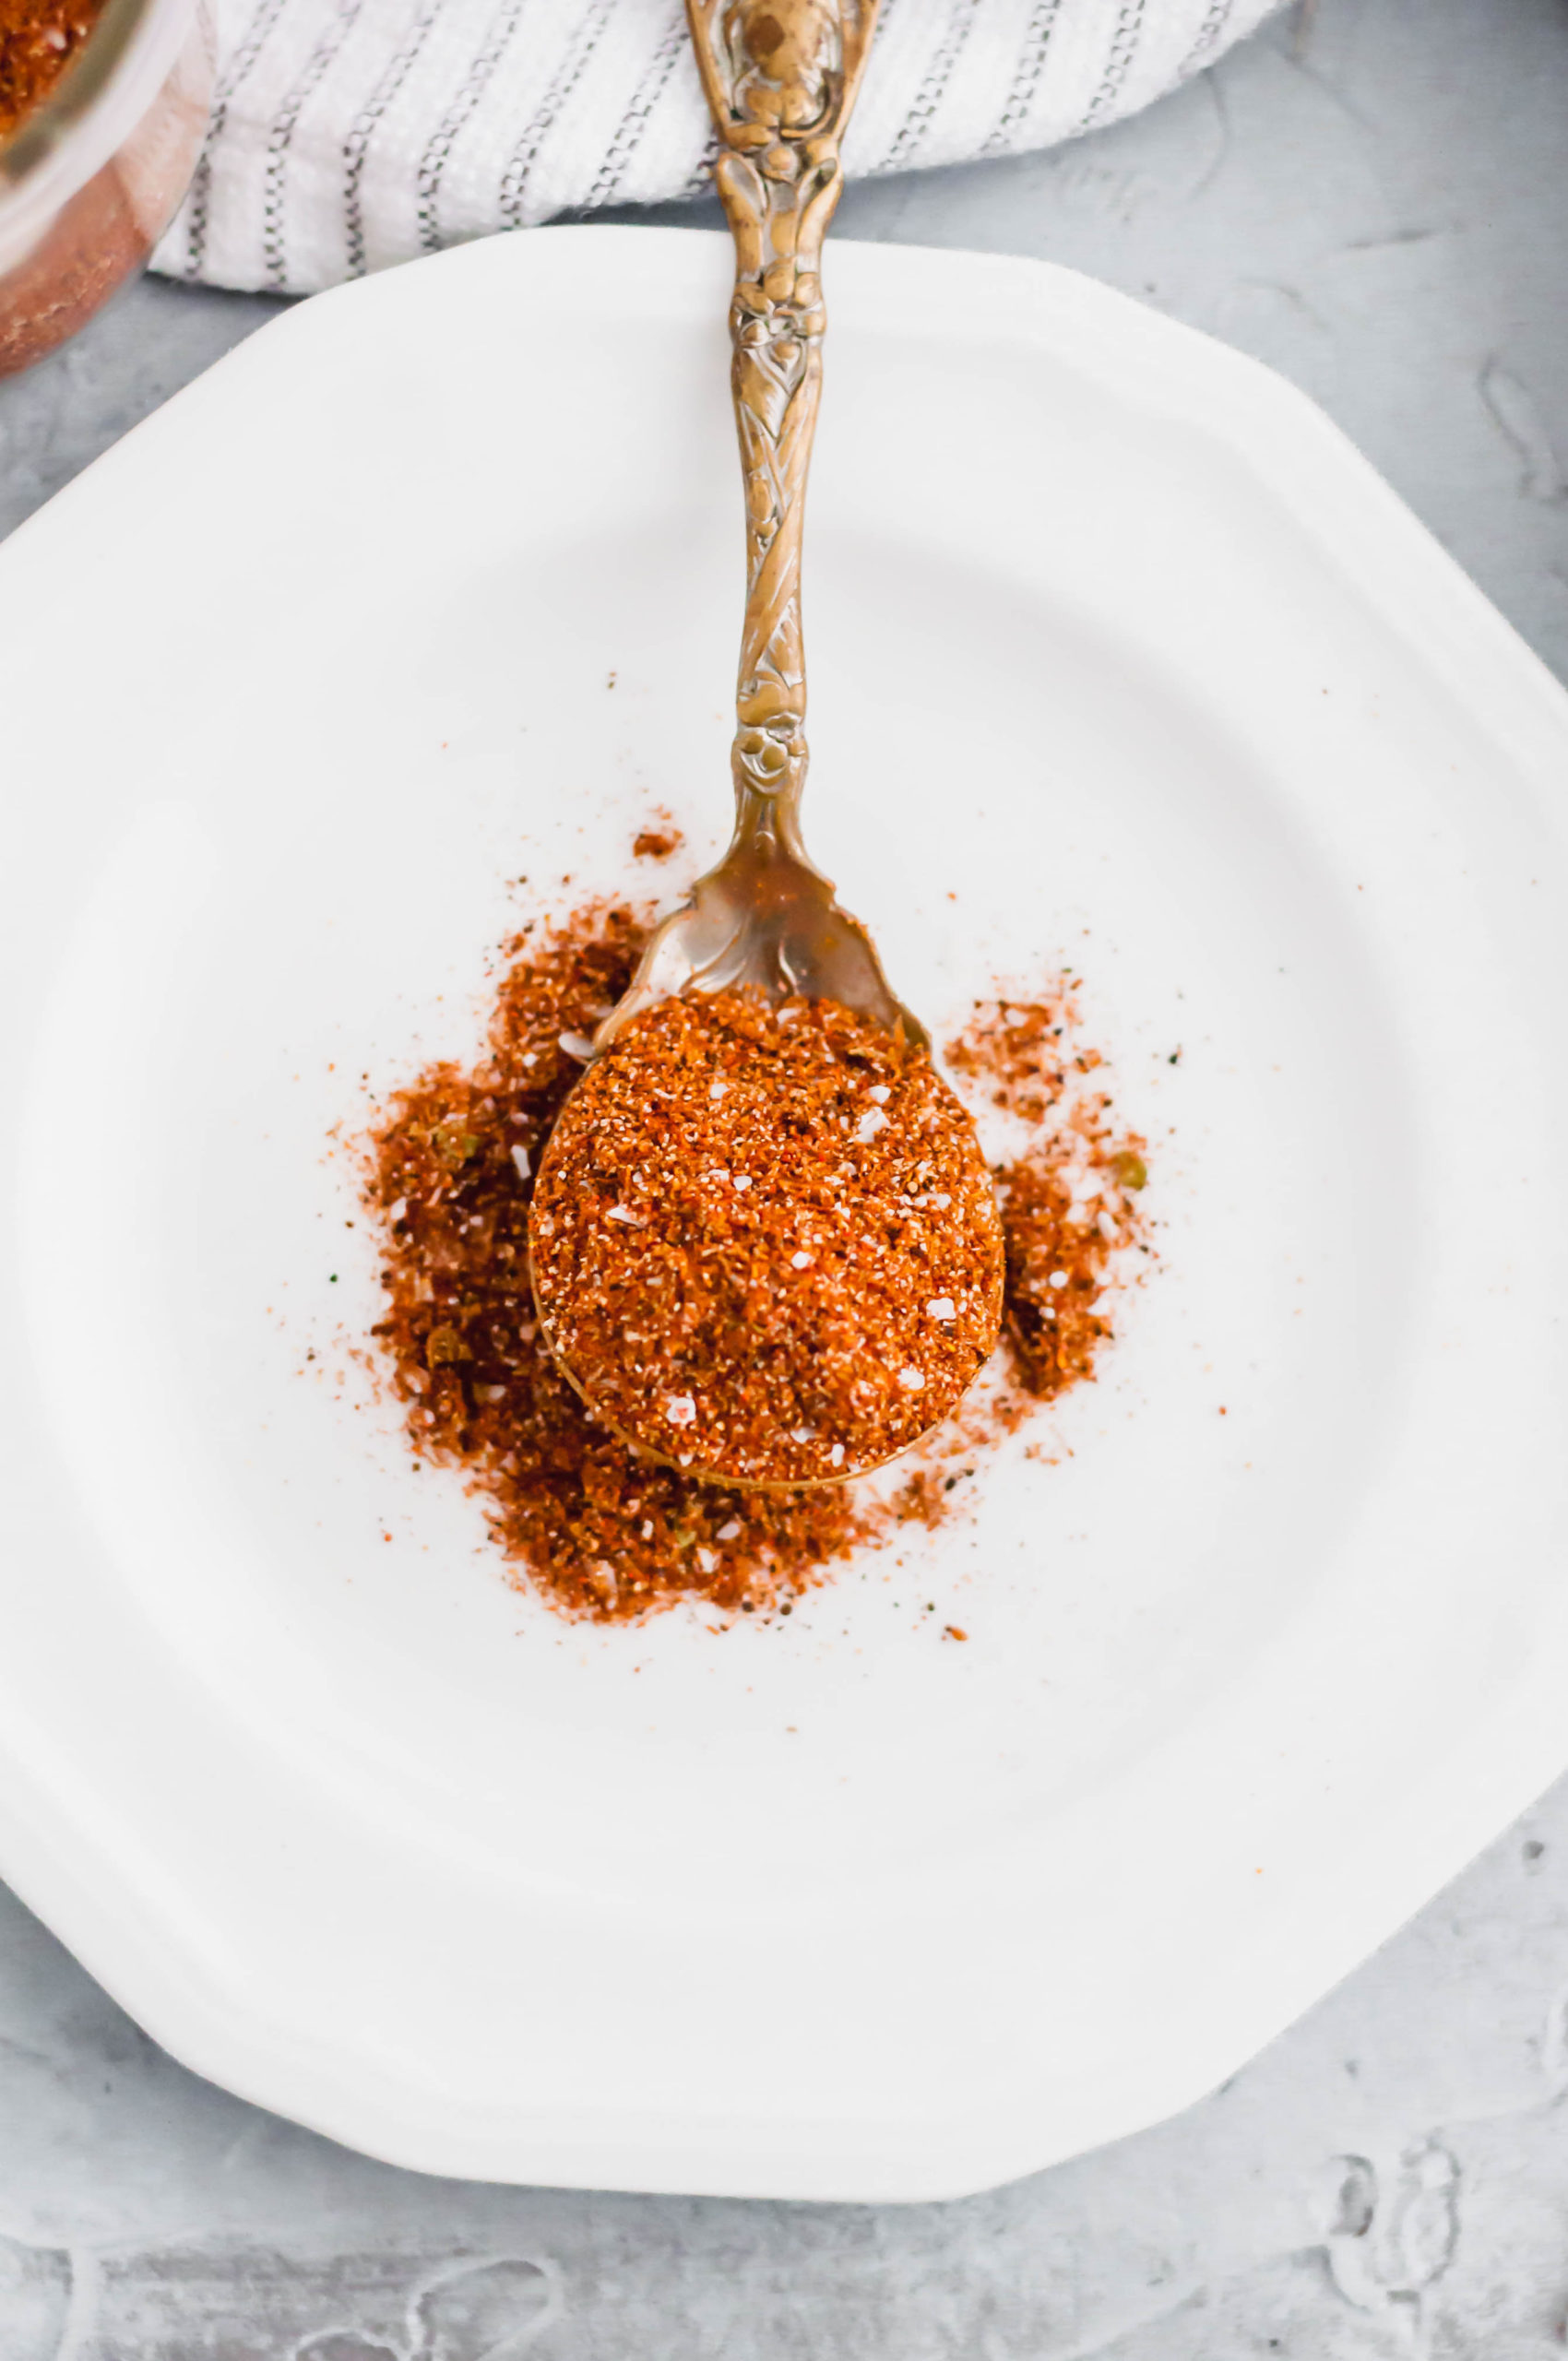 This Fajita Seasoning Recipe will make you forget the store-bought stuff. Using pantry staples, make your own spicy, smoky fajita seasoning just how you like it. No natural flavors or weird ingredients in this homemade spice mix.